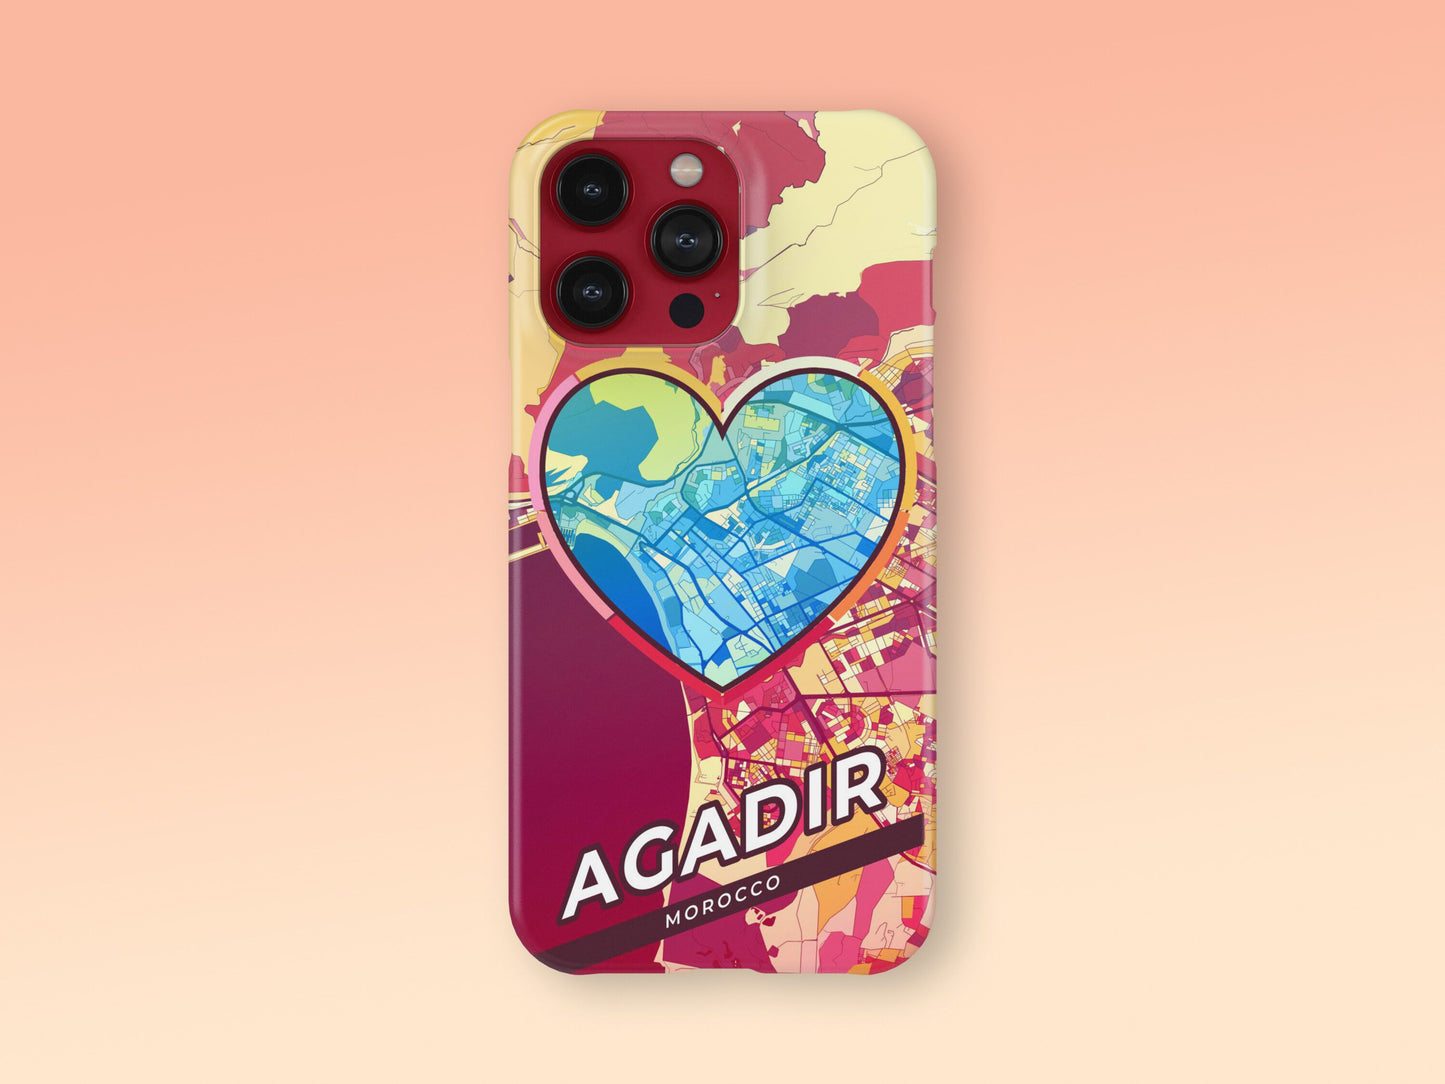 Agadir Morocco slim phone case with colorful icon. Birthday, wedding or housewarming gift. Couple match cases. 2